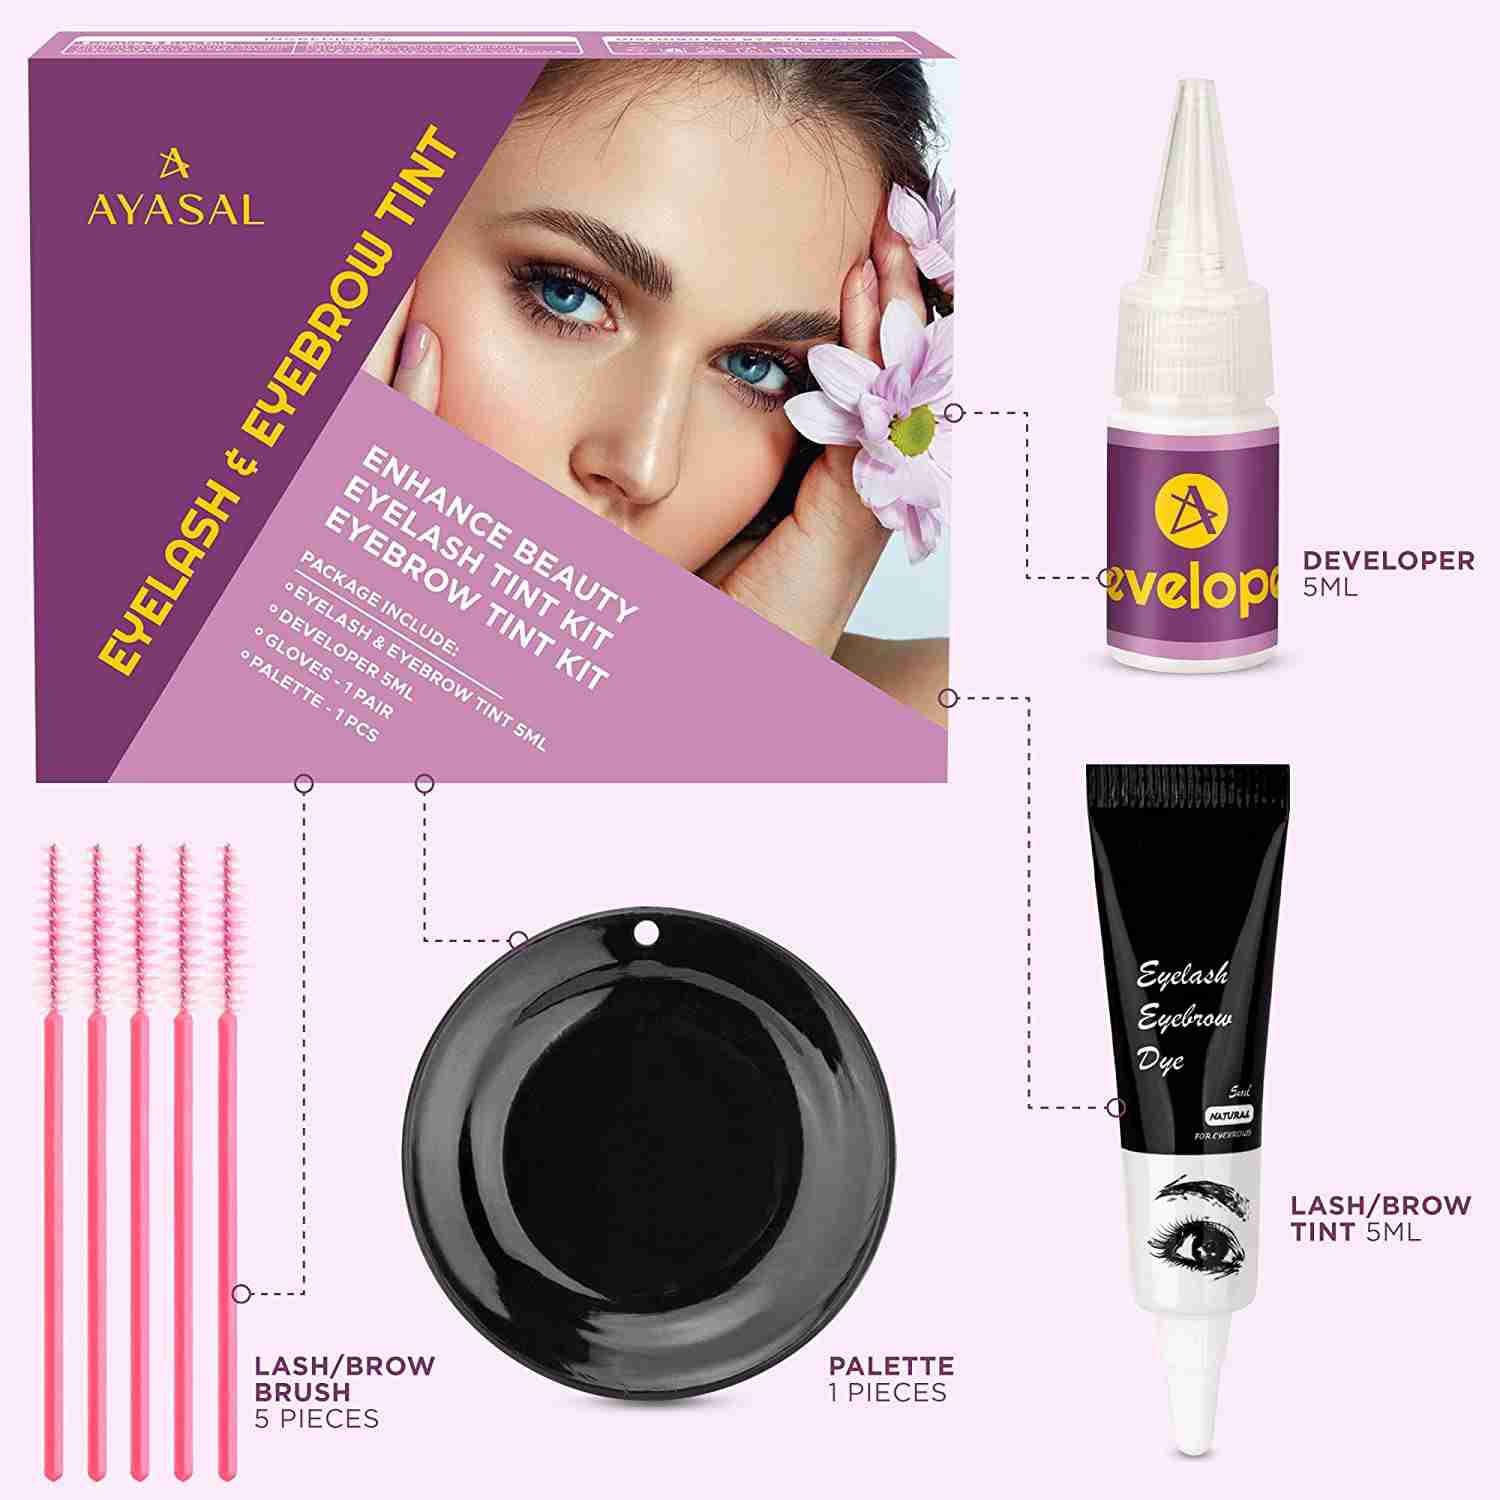 ayasal-eyebrow-coloring-kit with discount code